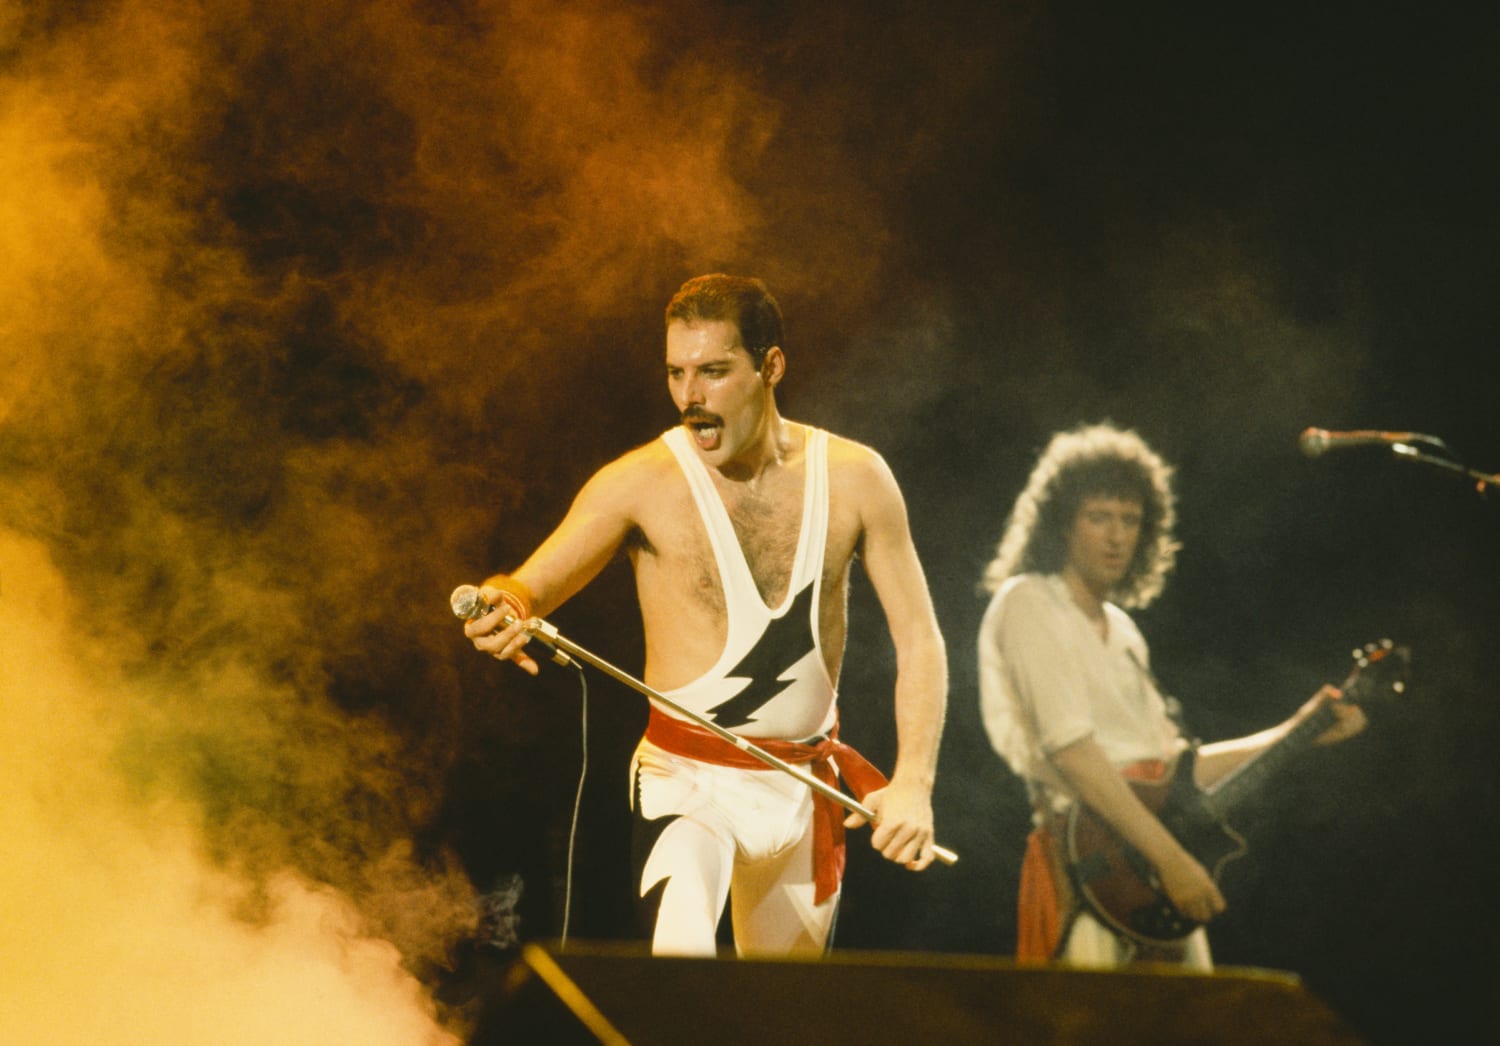 Queen Releases 'Face It Alone' with Freddie Mercury Vocals